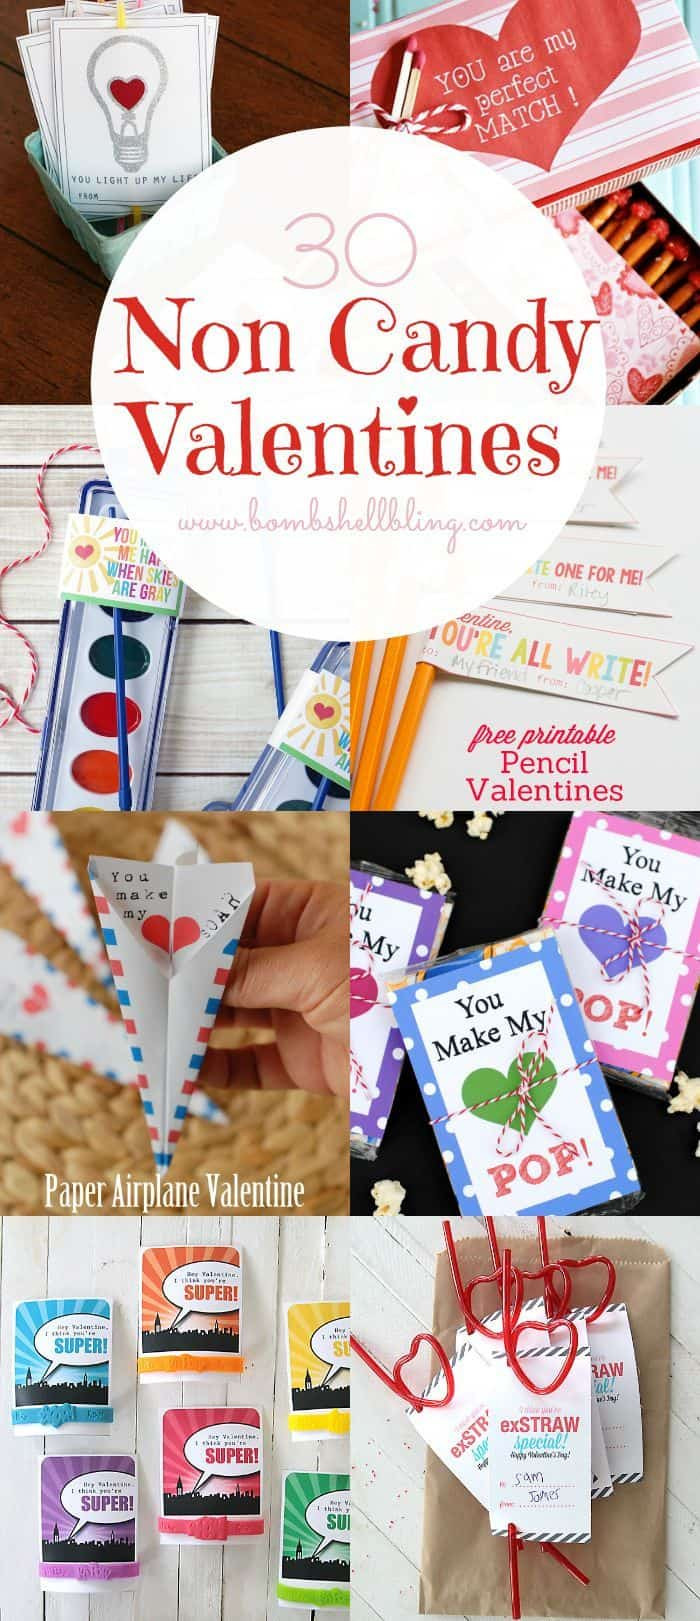 Valentine Gifts For Children
 Non Candy Valentine s Day Gift Ideas for Kids